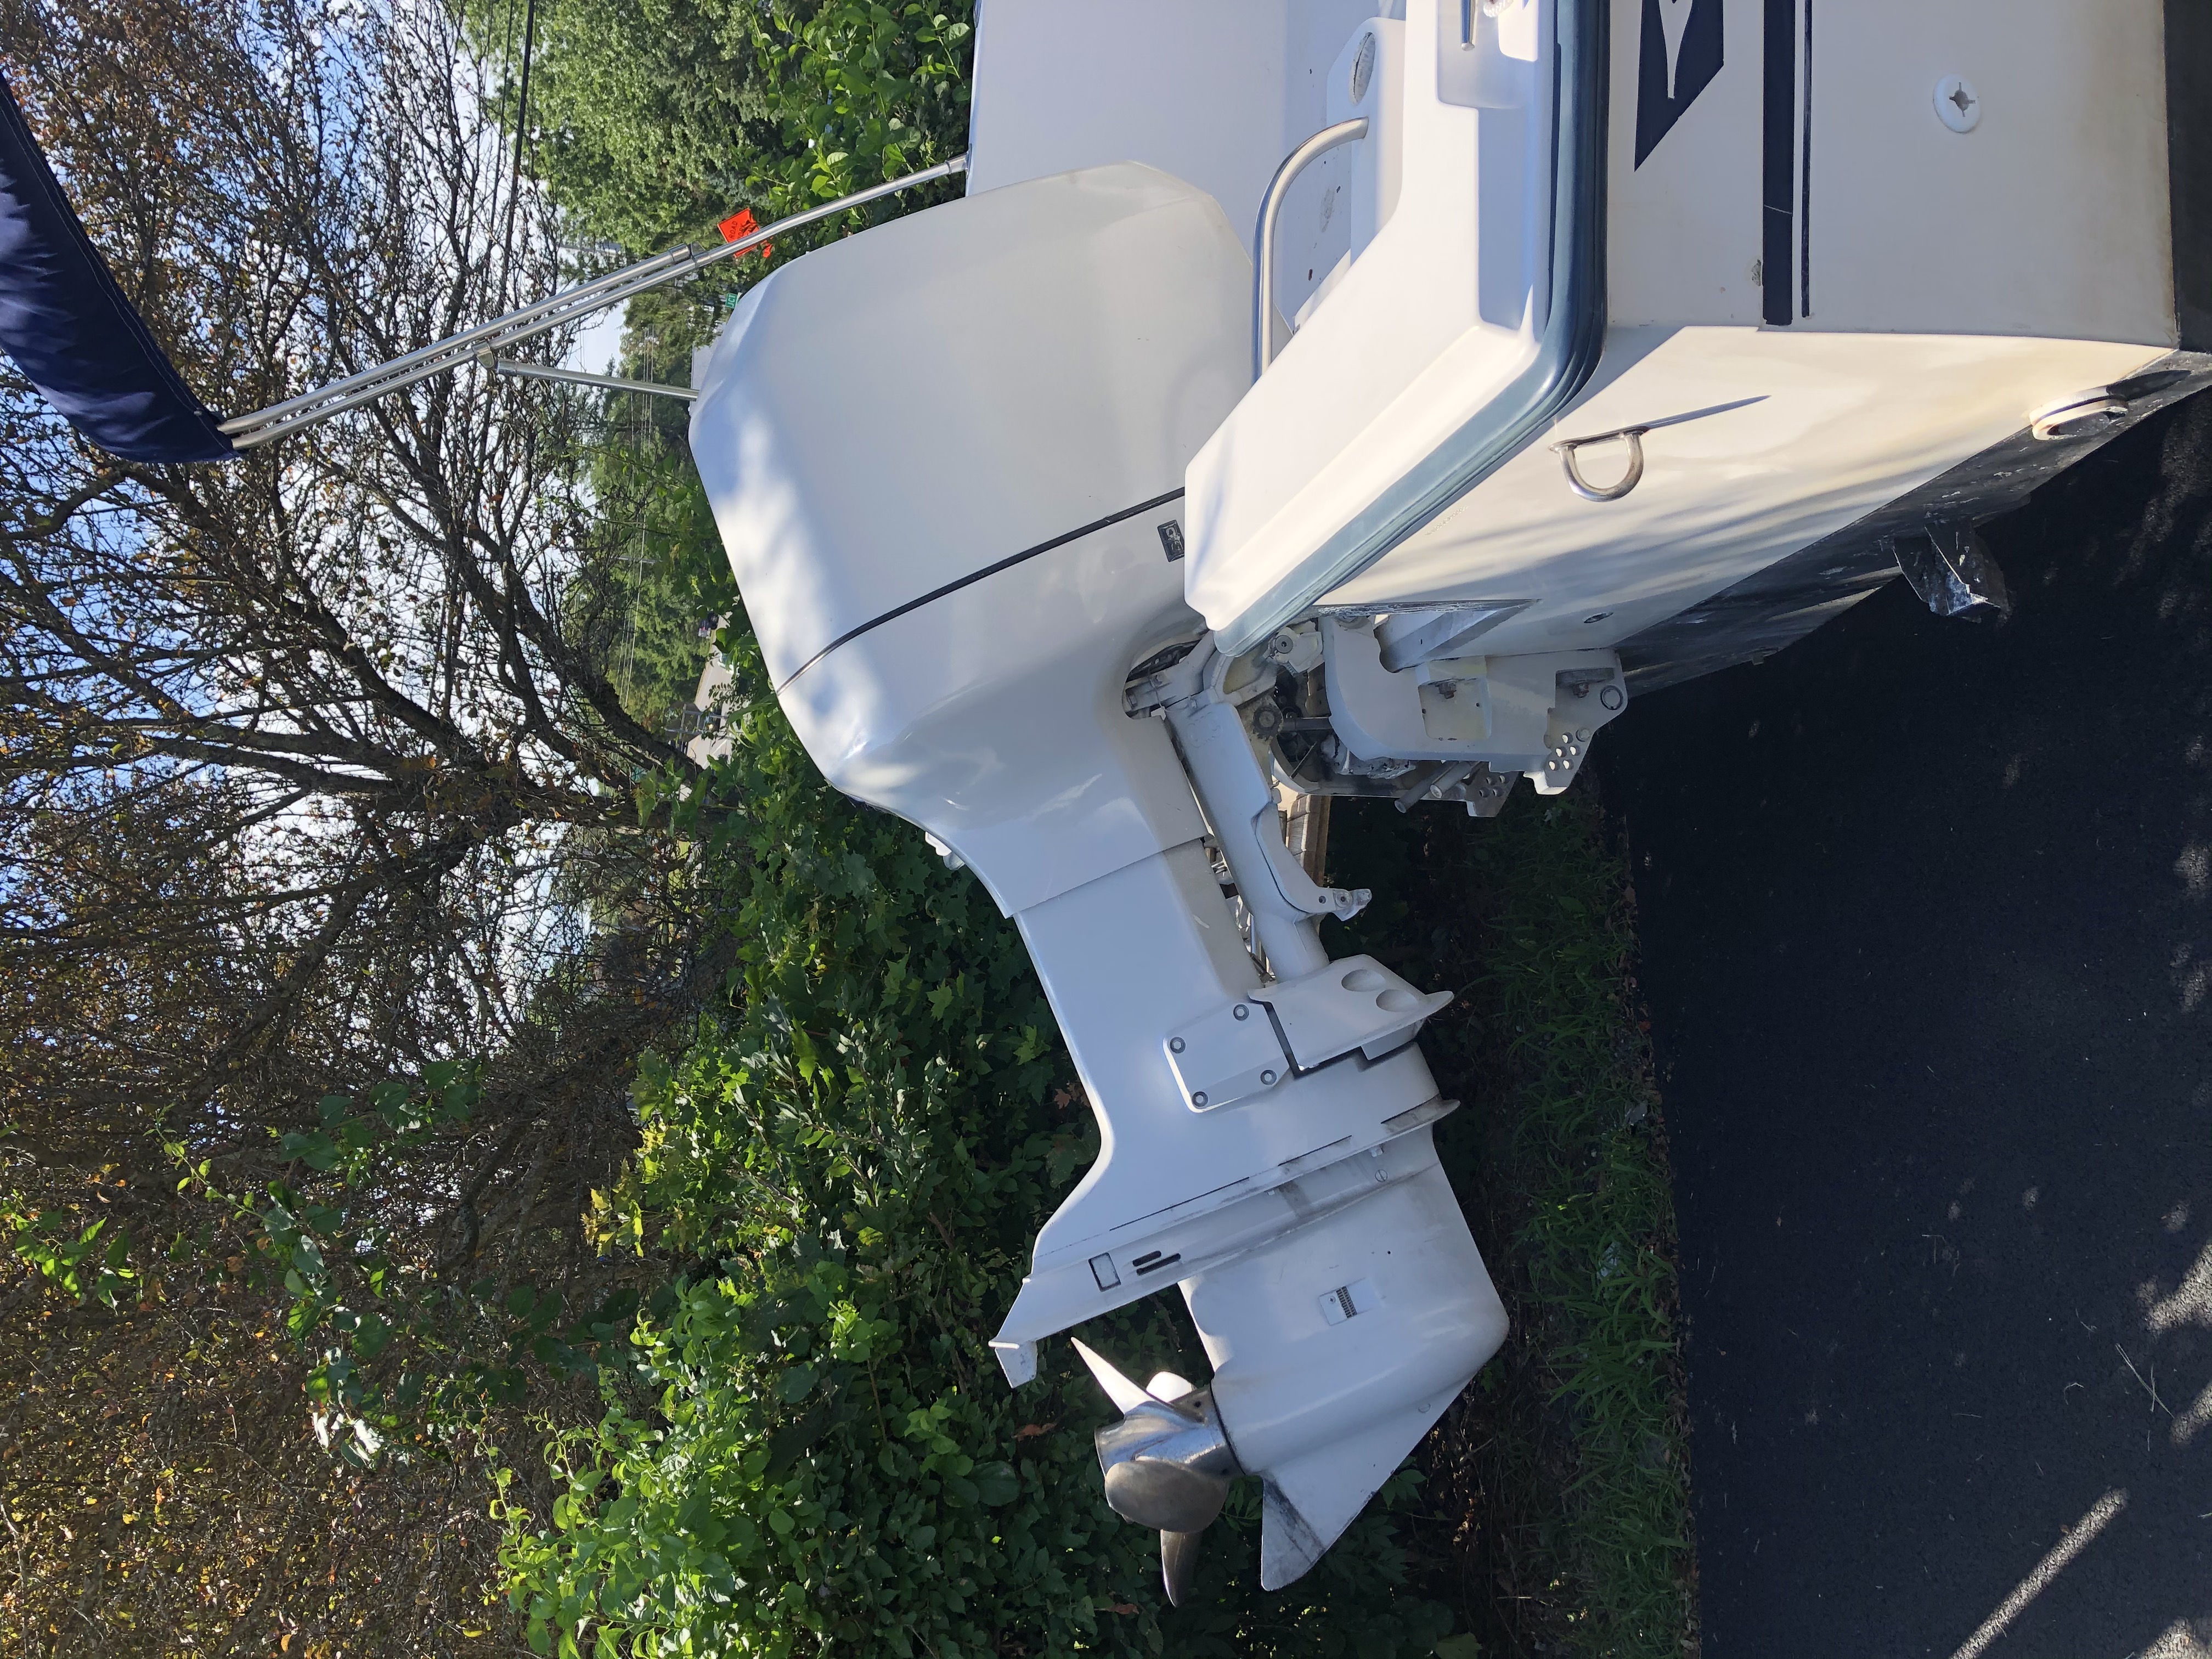 1989 Grady-White 20' Overnighter Power boat for sale in Kent Lakes, NY - image 3 